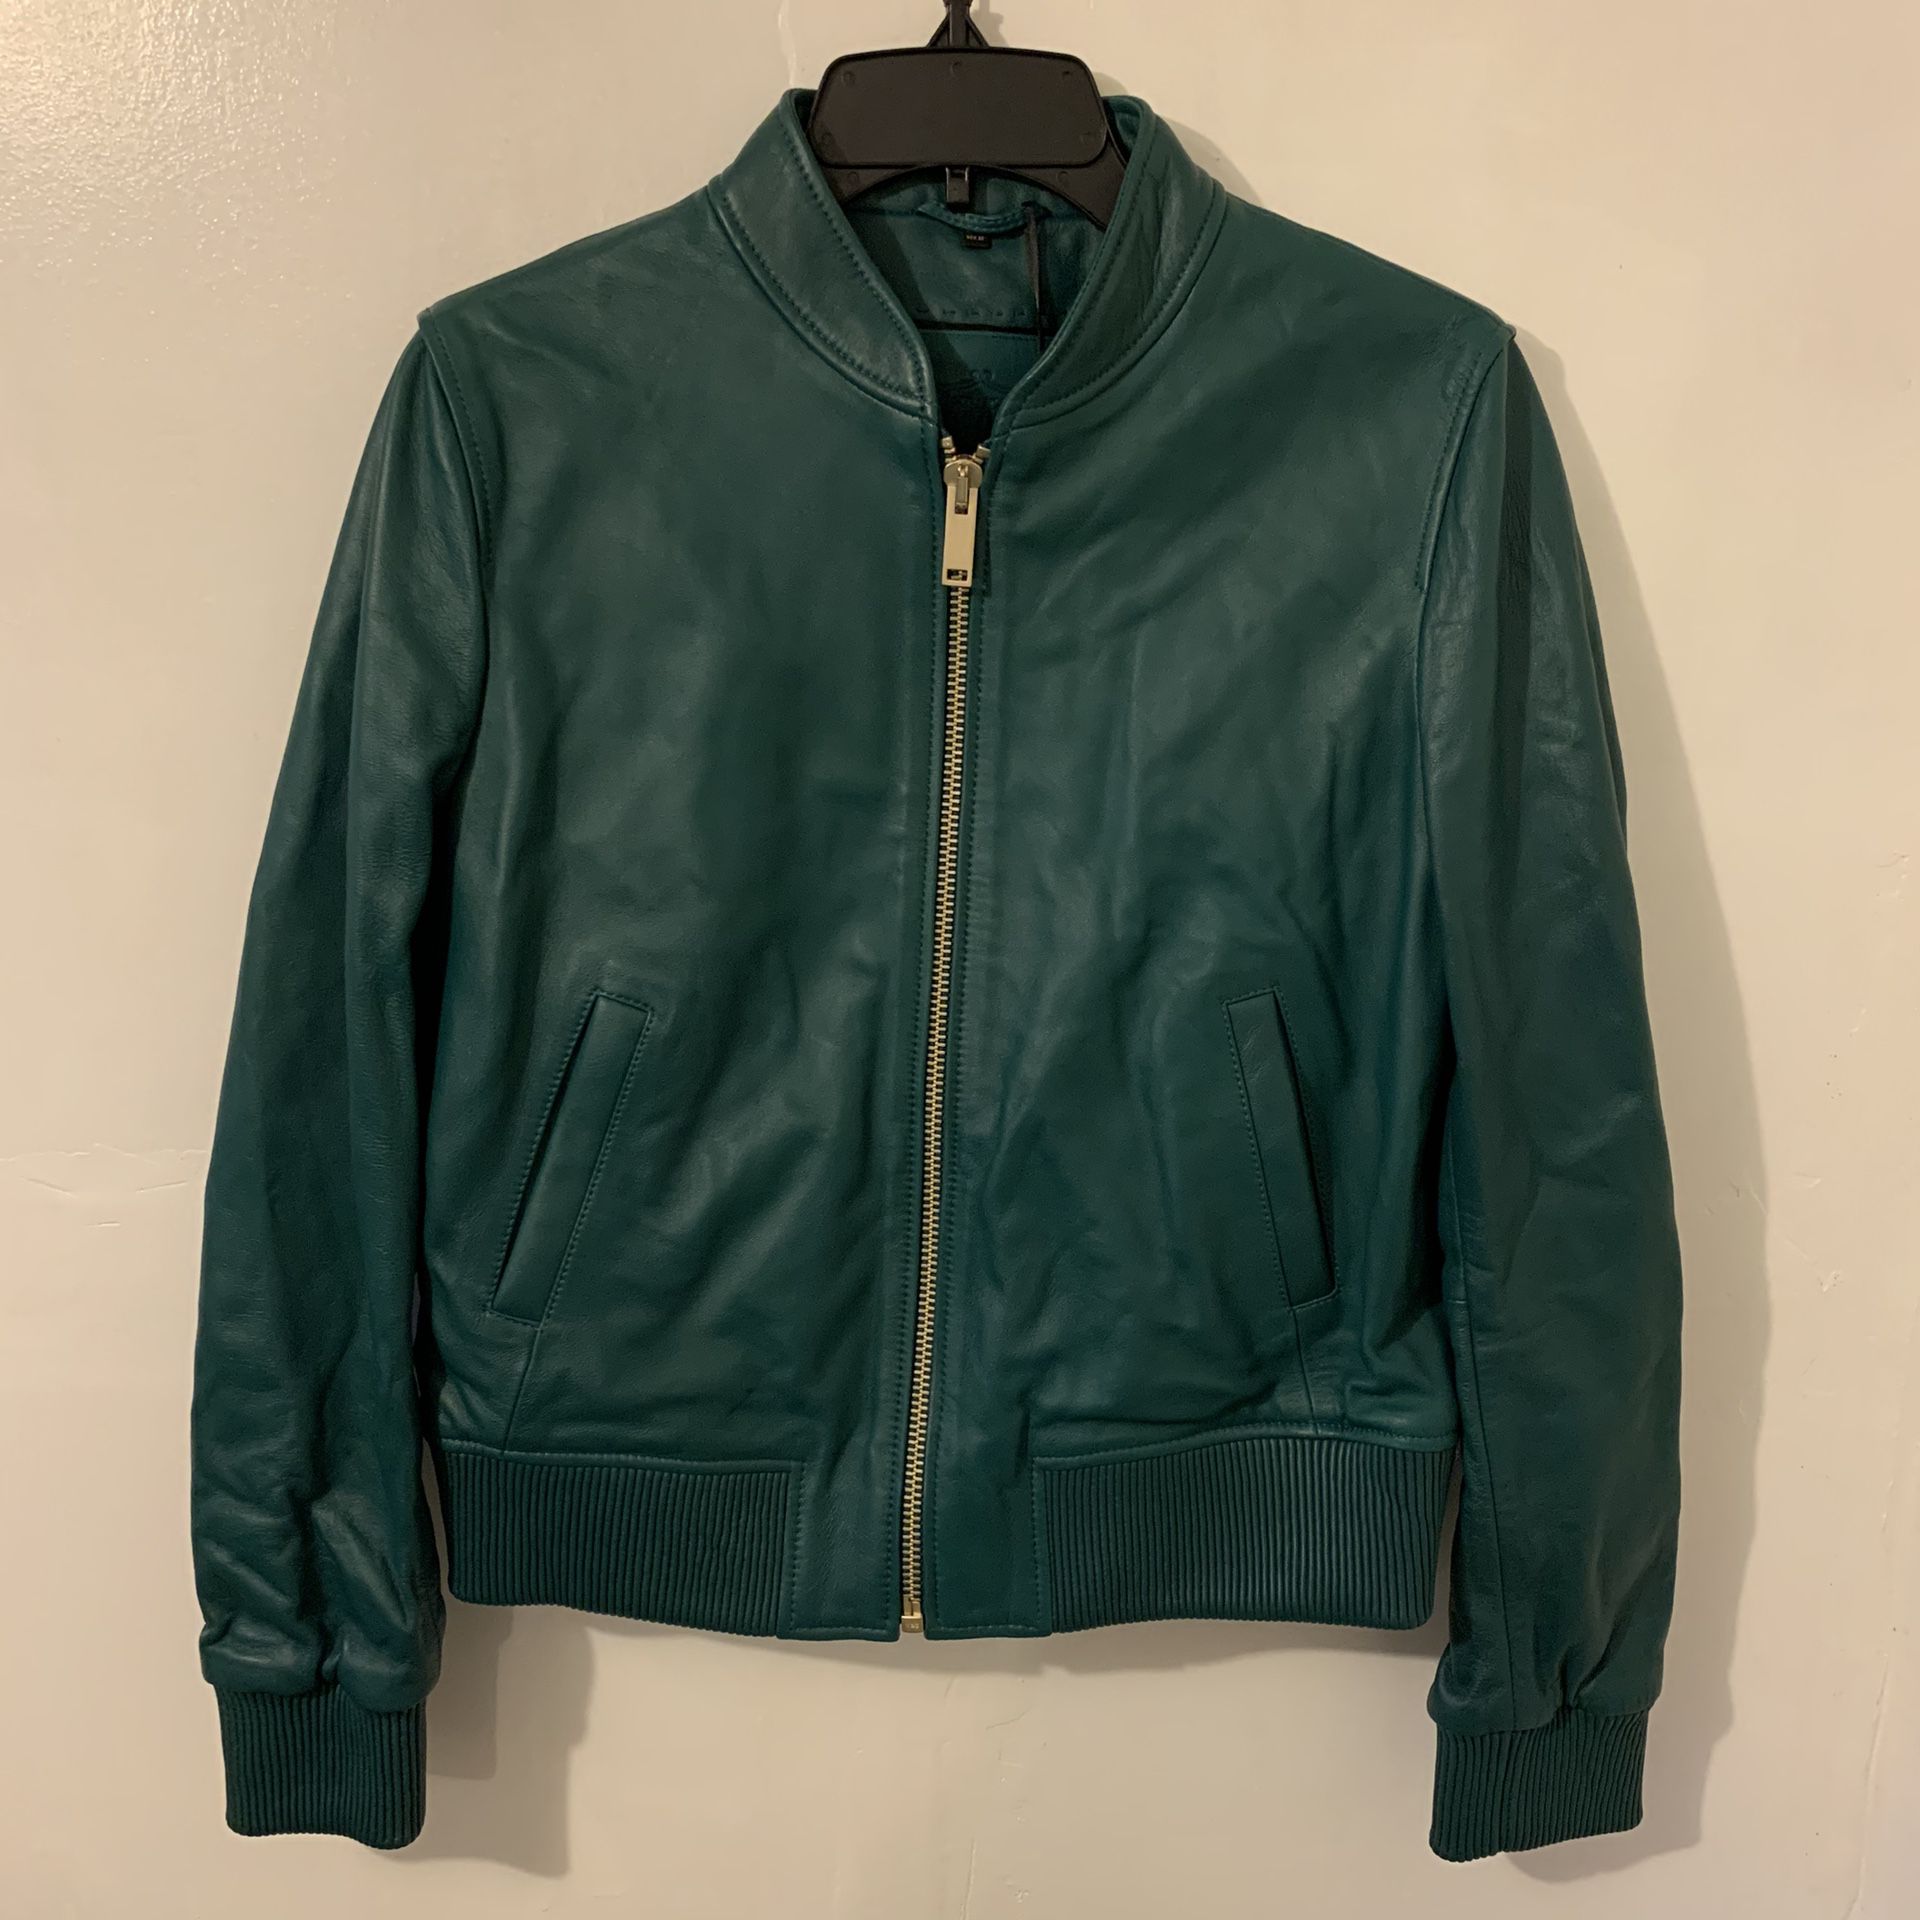 NEW Massimo Dutti Women's Green Full ZIP Leather Jacket Size Medium Natural Leather. Retails for $345